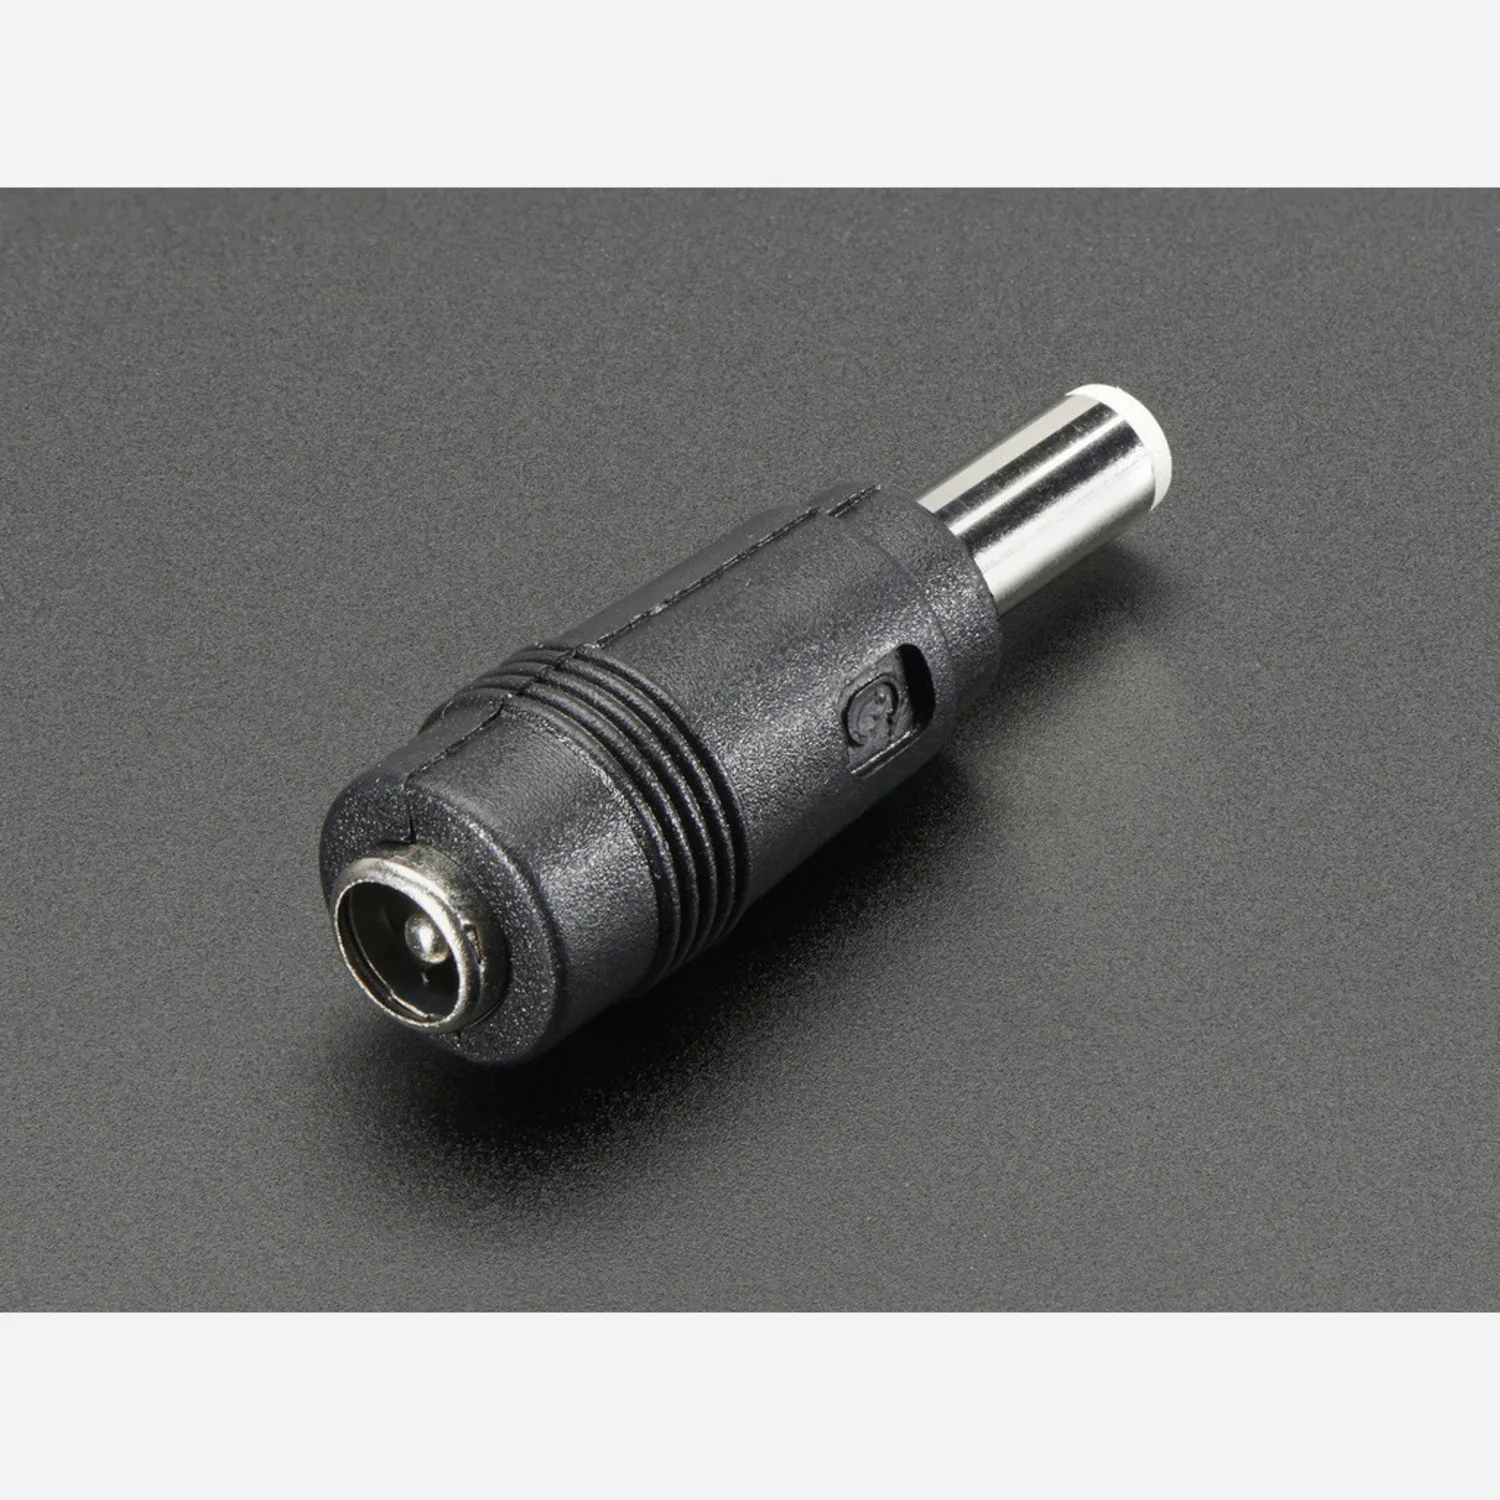 Photo of 2.1mm to 2.5mm DC Barrel Plug Adapter